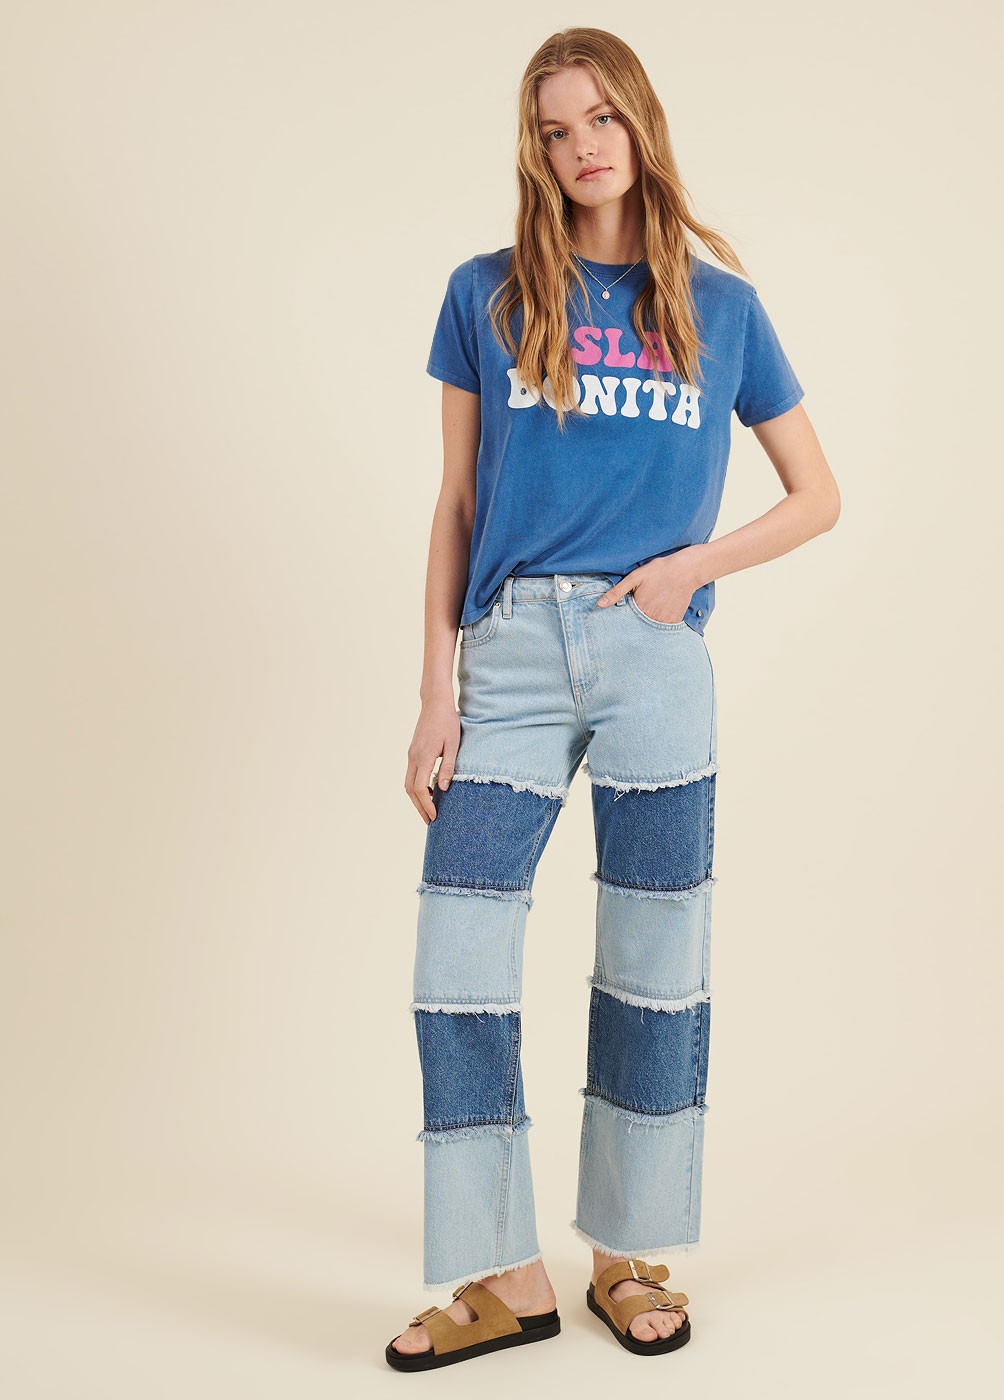 SIRA PANELLED JEANS